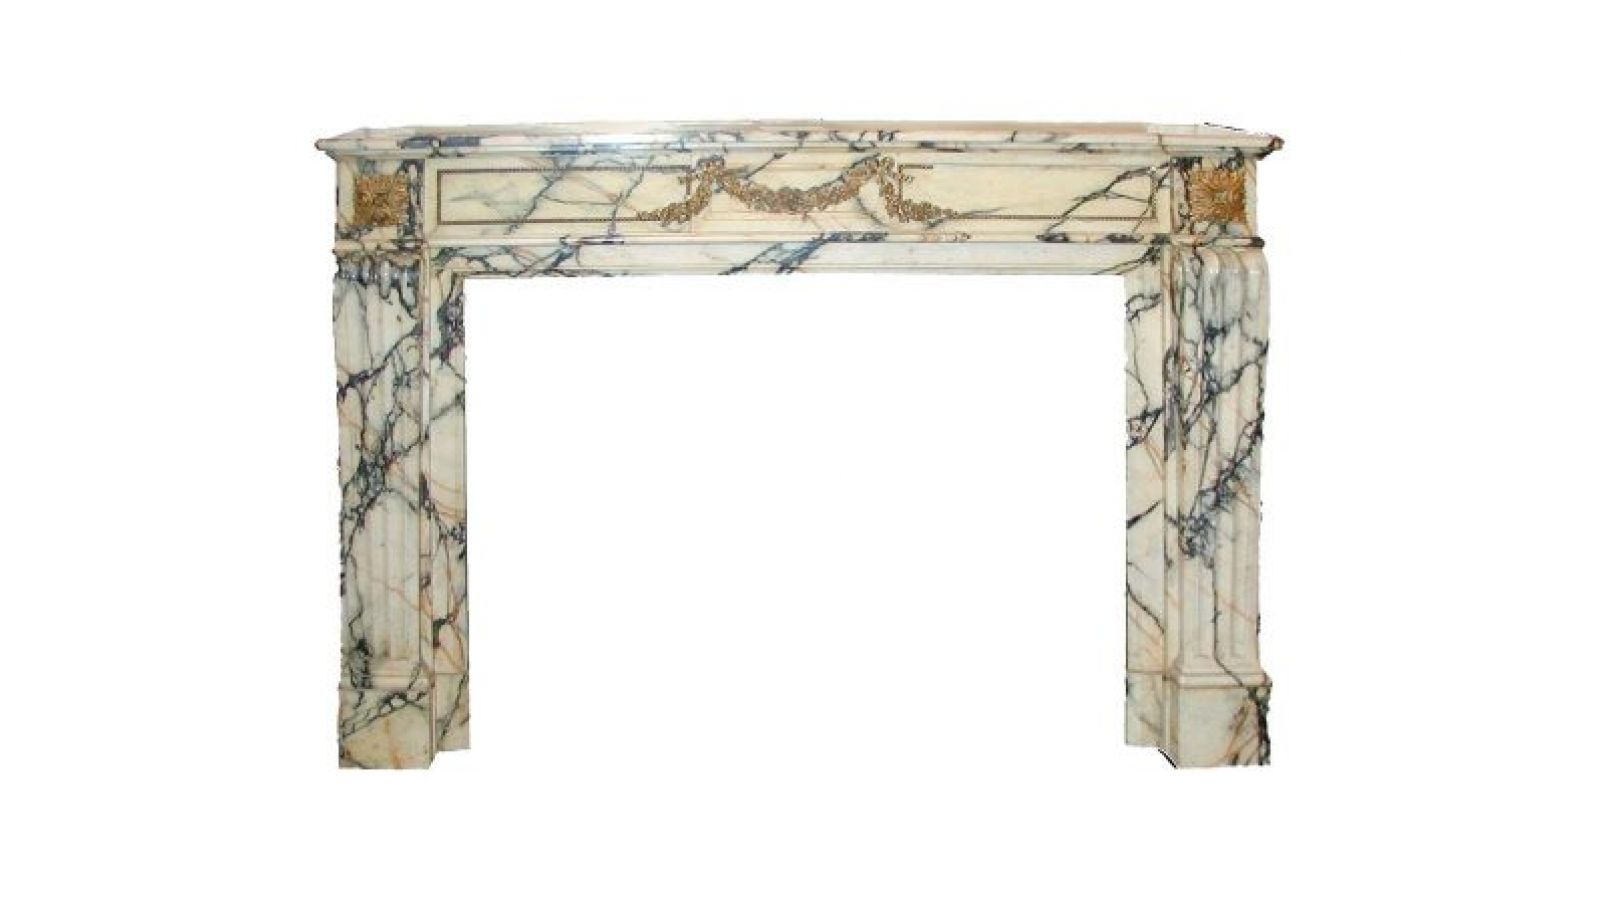 Plaza Hotel Sienna Marble Mantel with Ormulu Details